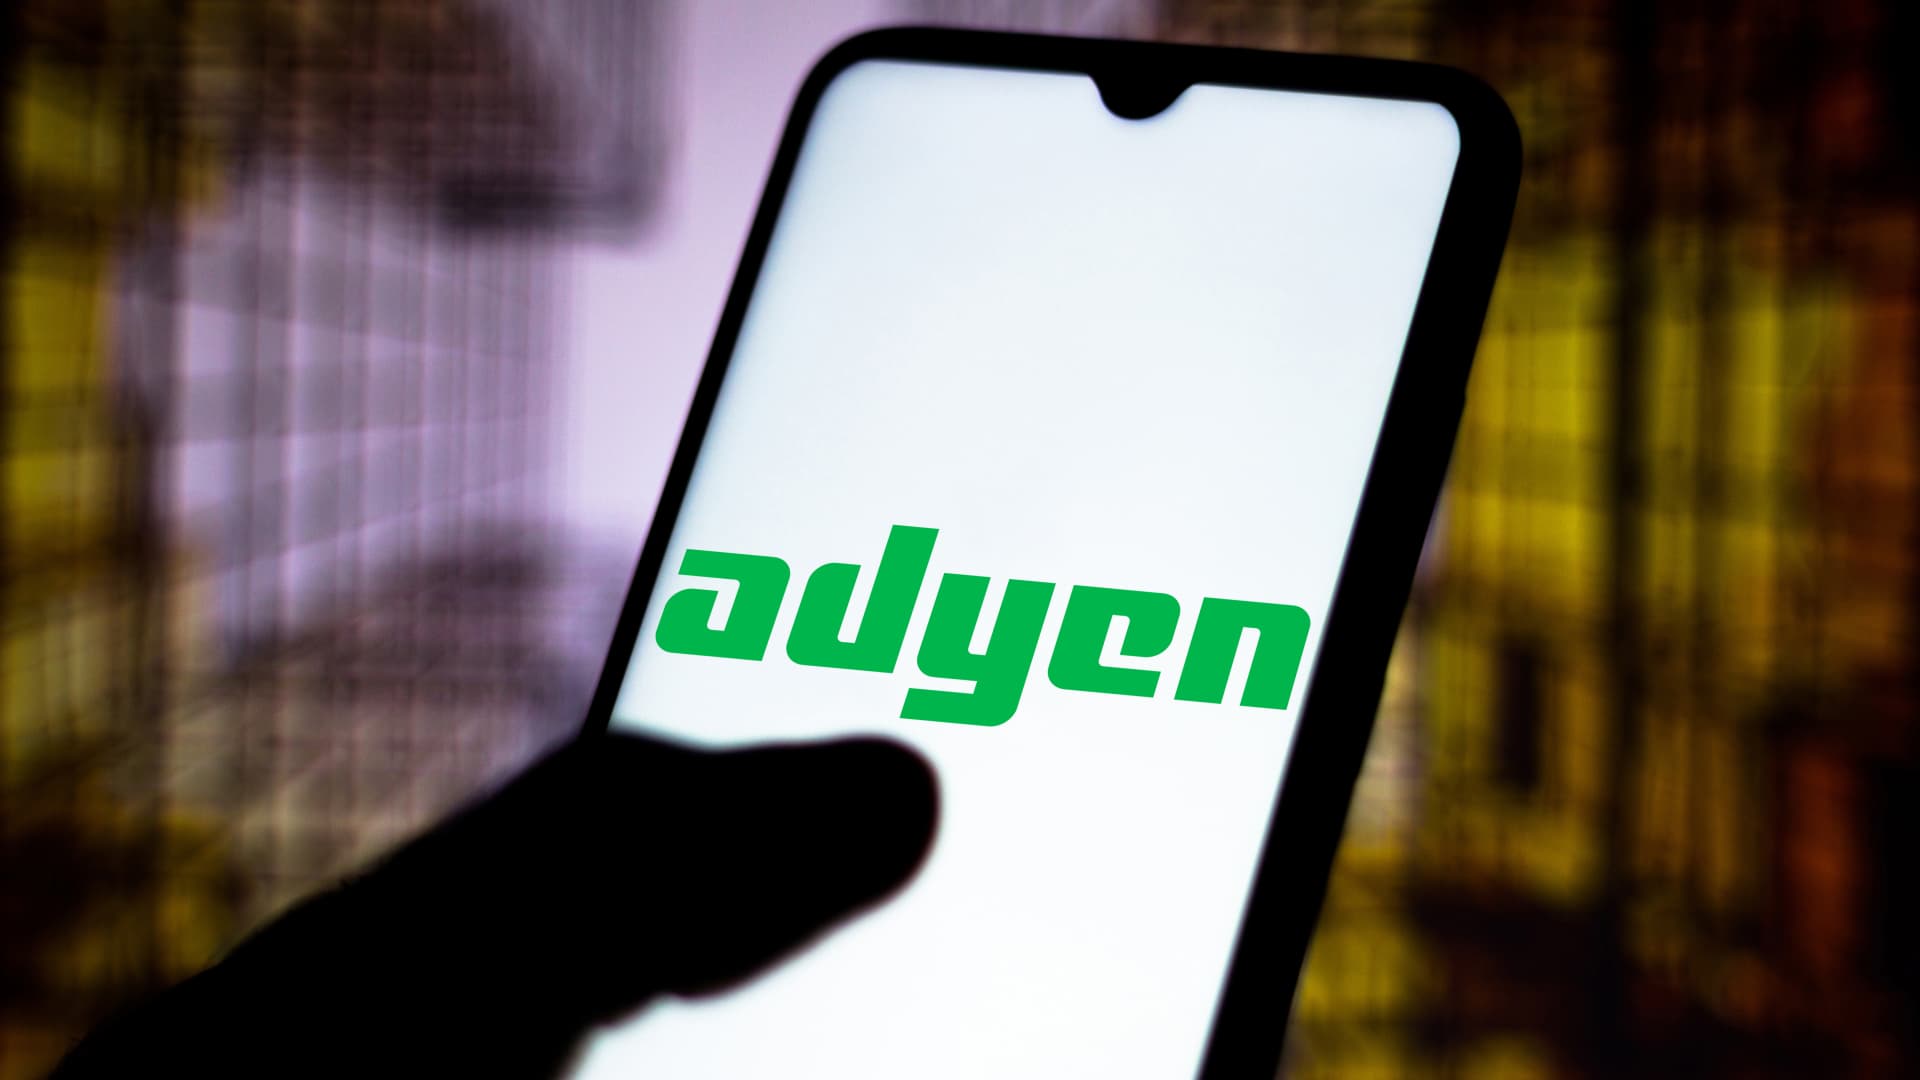 Stripe rival Adyen secures banking license in the UK